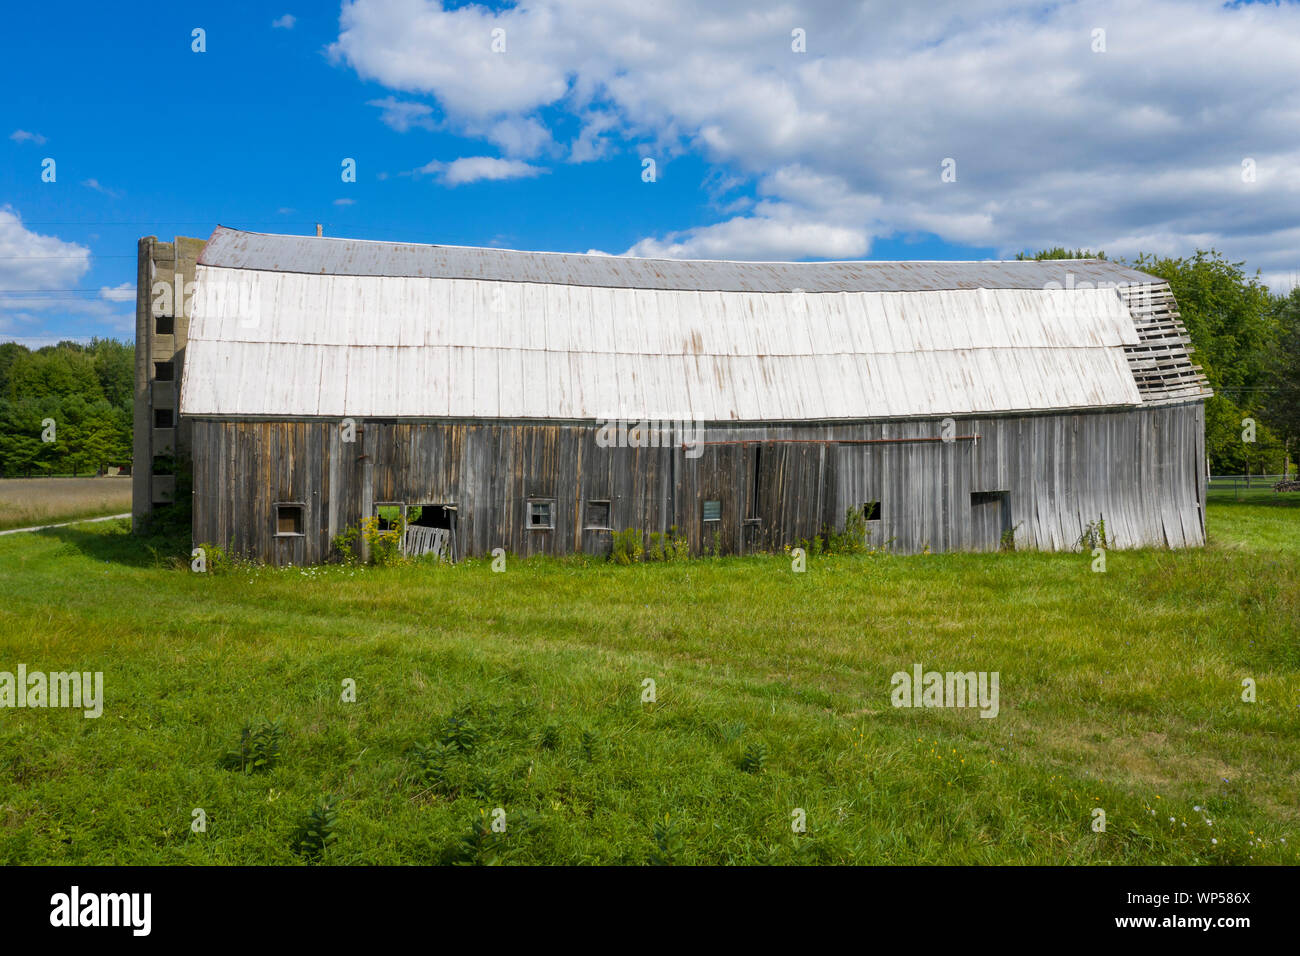 Adair, Michigan - An old, decrepit barn with the remains of a concrete silo. Stock Photo